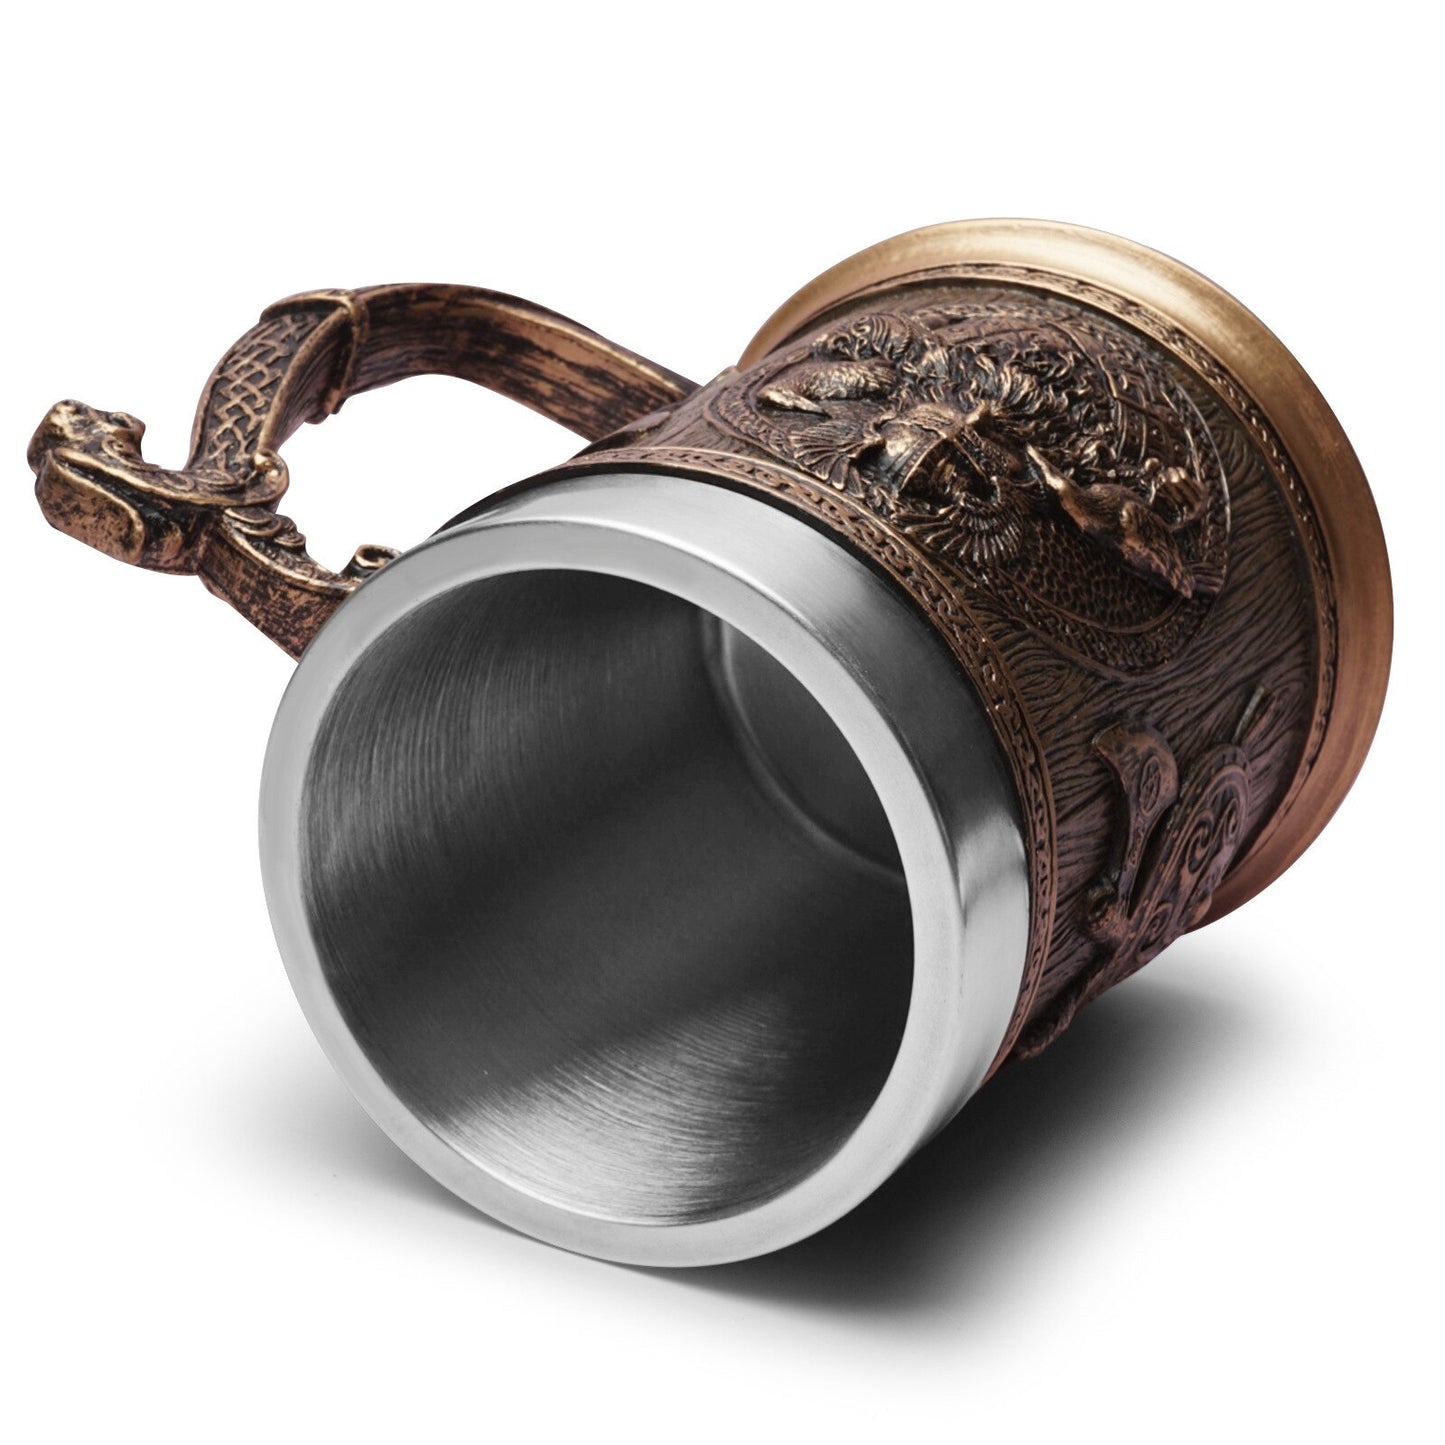 stainless steal wooden beer mug inspired by odin's